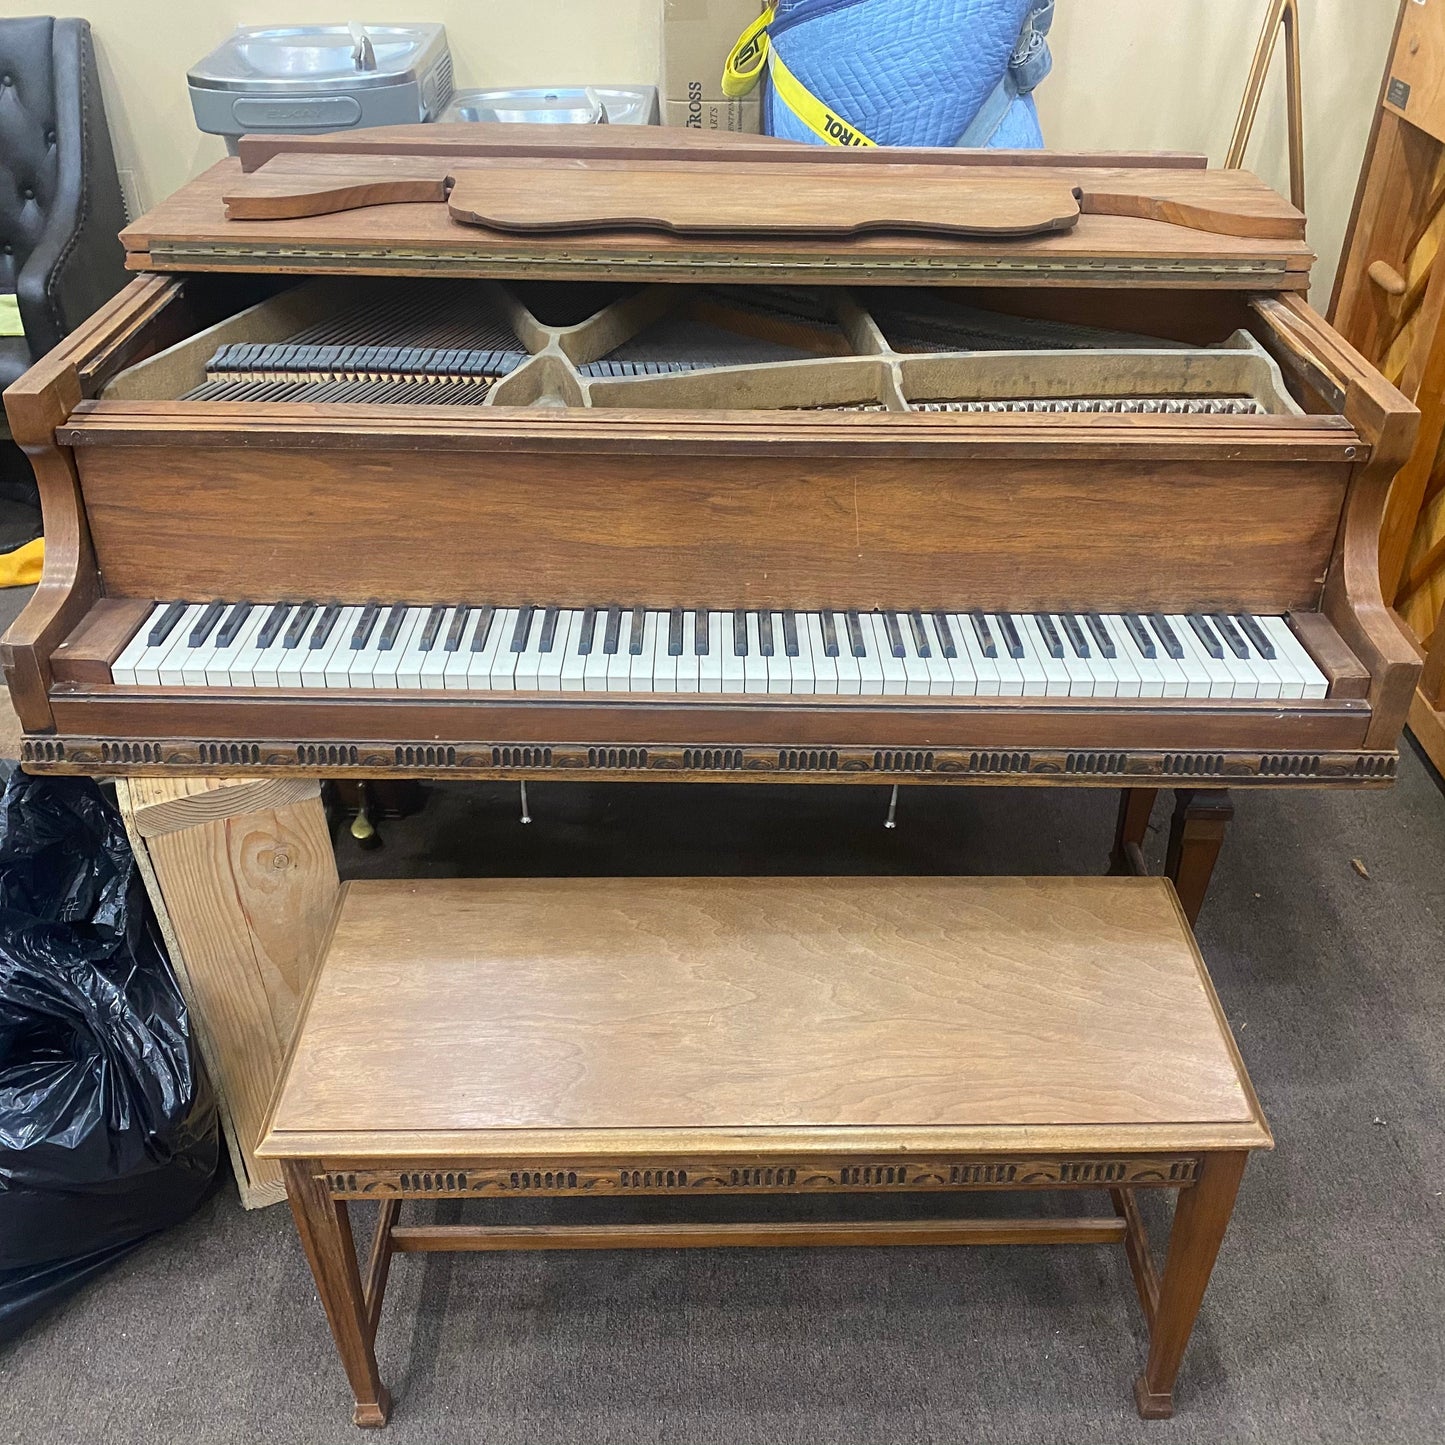 Image 17 of Vintage Family Heirloom Baby Grand Piano - Commissioned for Restoration & Refinishing!